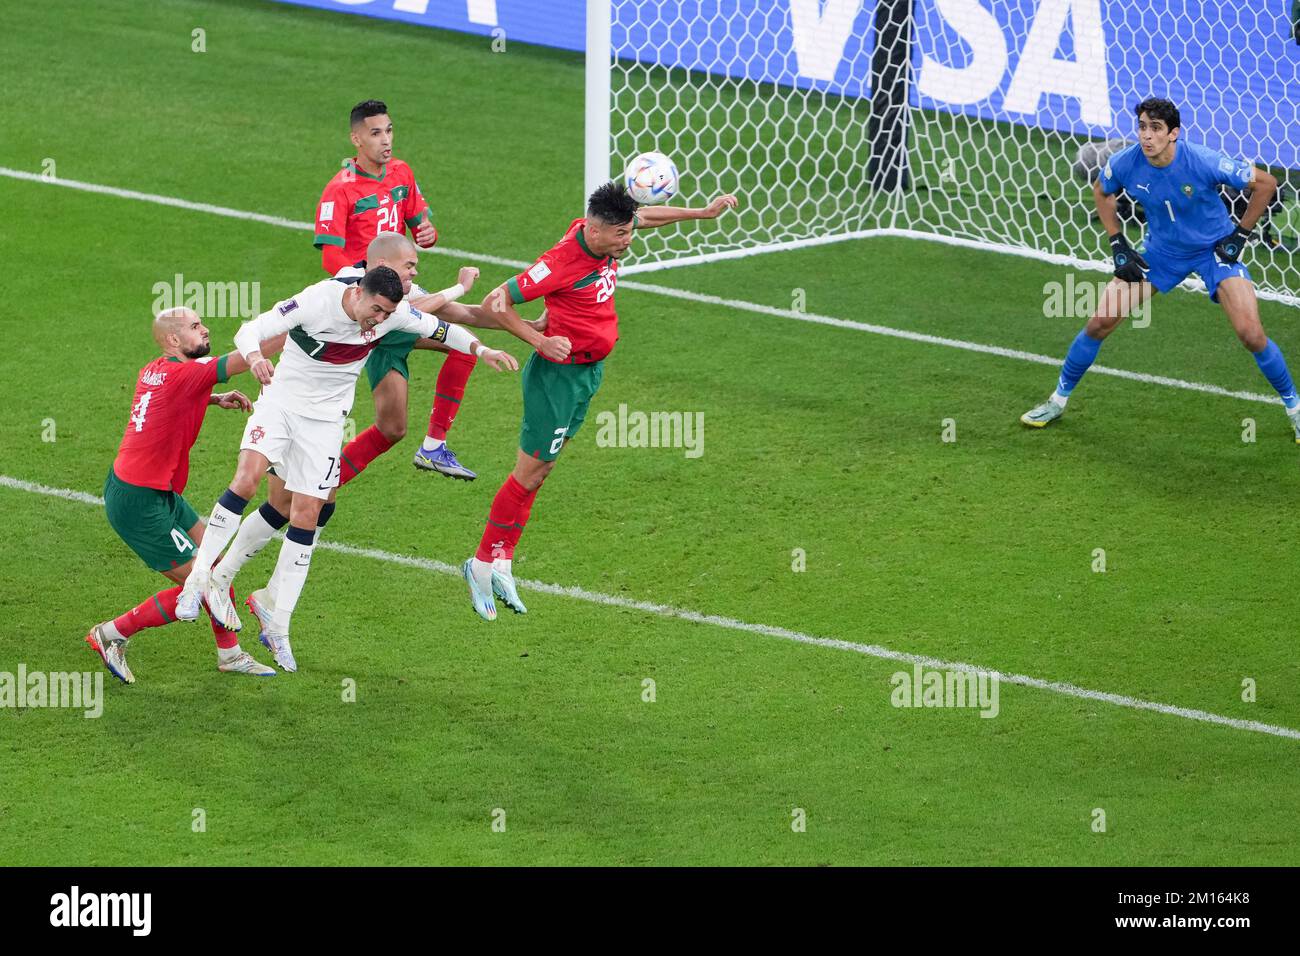 Doha, Qatar. 10th Dec, 2022. Portugal's Cristiano Ronaldo (2nd L) and Pepe (3rd L) vie a header with Morocco's Achraf Dari during their Quarterfinal of the 2022 FIFA World Cup at Al Thumama Stadium in Doha, Qatar, Dec. 10, 2022. Credit: Zheng Huansong/Xinhua/Alamy Live News Stock Photo